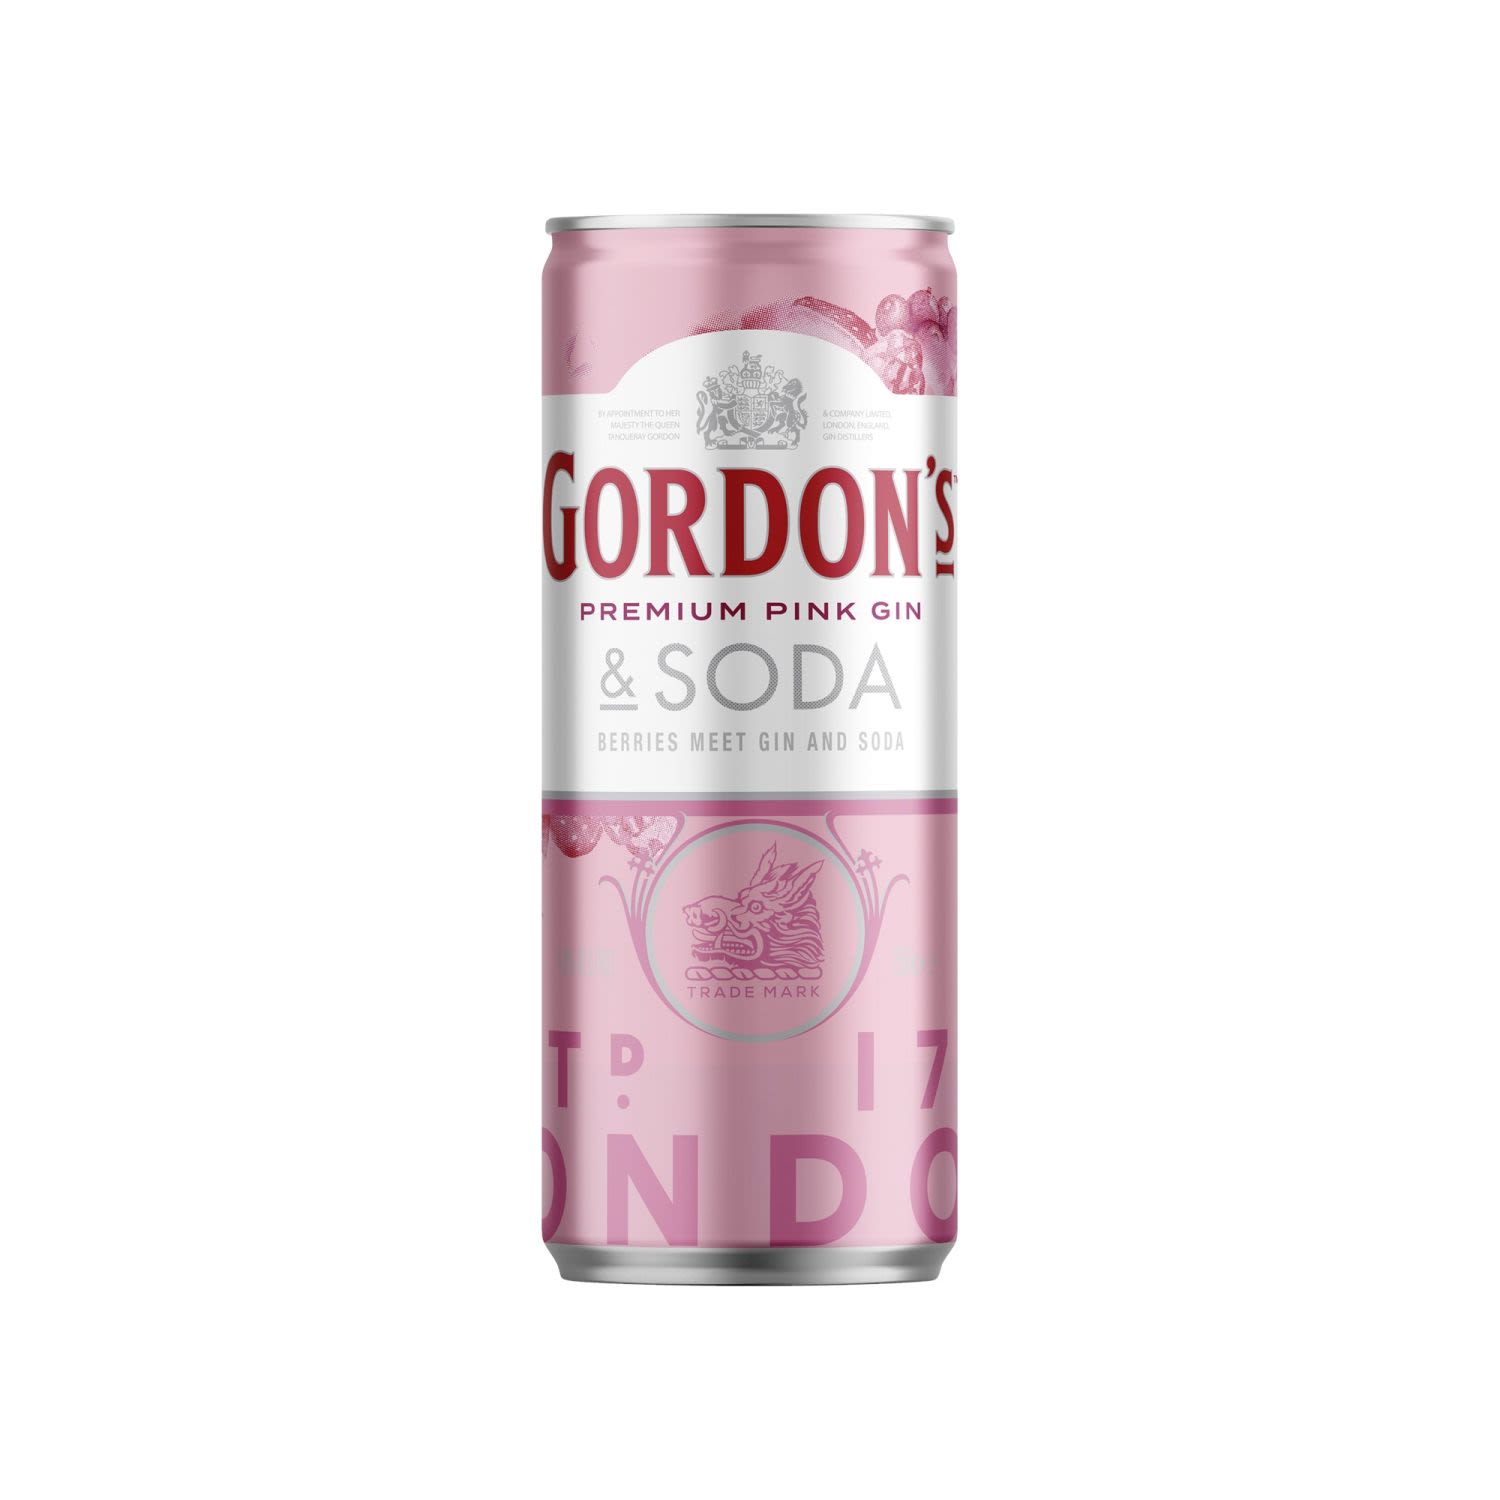 Gordon's Premium Pink Gin and Soda Cans 250mL - Made using only the highest quality ingredients and only natural flavourings to provide an authentic real berry flavour lengthened with soda for a clean and crisp taste.  Gordon's Premium Pink Distilled Gin was inspired by Gordon's original 1880 pink gin recipe. Crafted to balance the refreshing taste of Gordon's with the sweetness of raspberries and strawberries with the tang of redcurrant. Made using only the highest quality ingredients and only natural flavourings to provide an authentic real berry flavour.<br /> <br />Alcohol Volume: 4.00%<br /><br />Pack Format: Can<br /><br />Standard Drinks: 0.8</br /><br />Pack Type: Can<br />